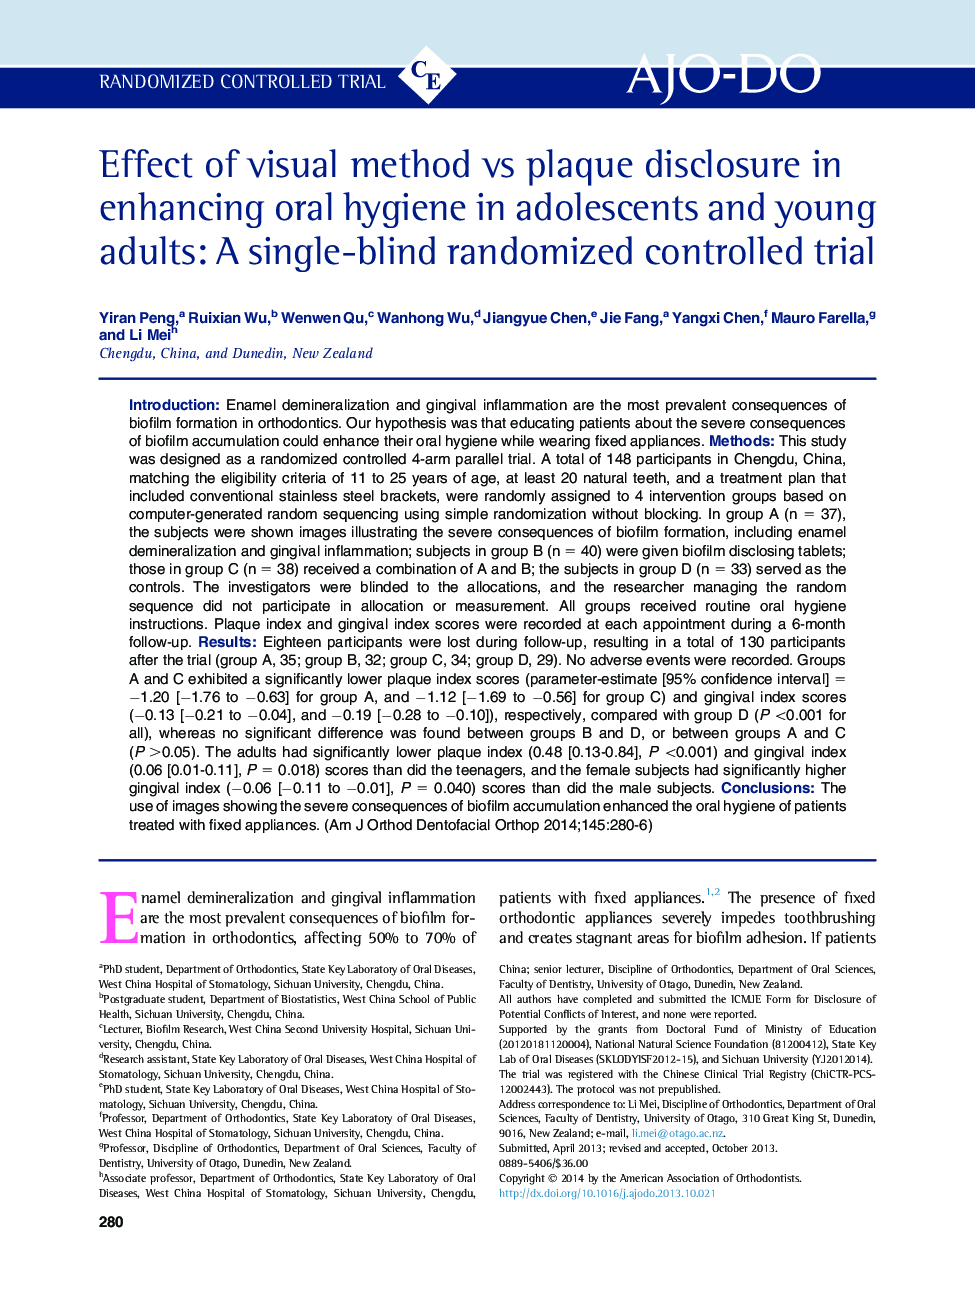 Effect of visual method vs plaque disclosure in enhancing oral hygiene in adolescents and young adults: A single-blind randomized controlled trial 